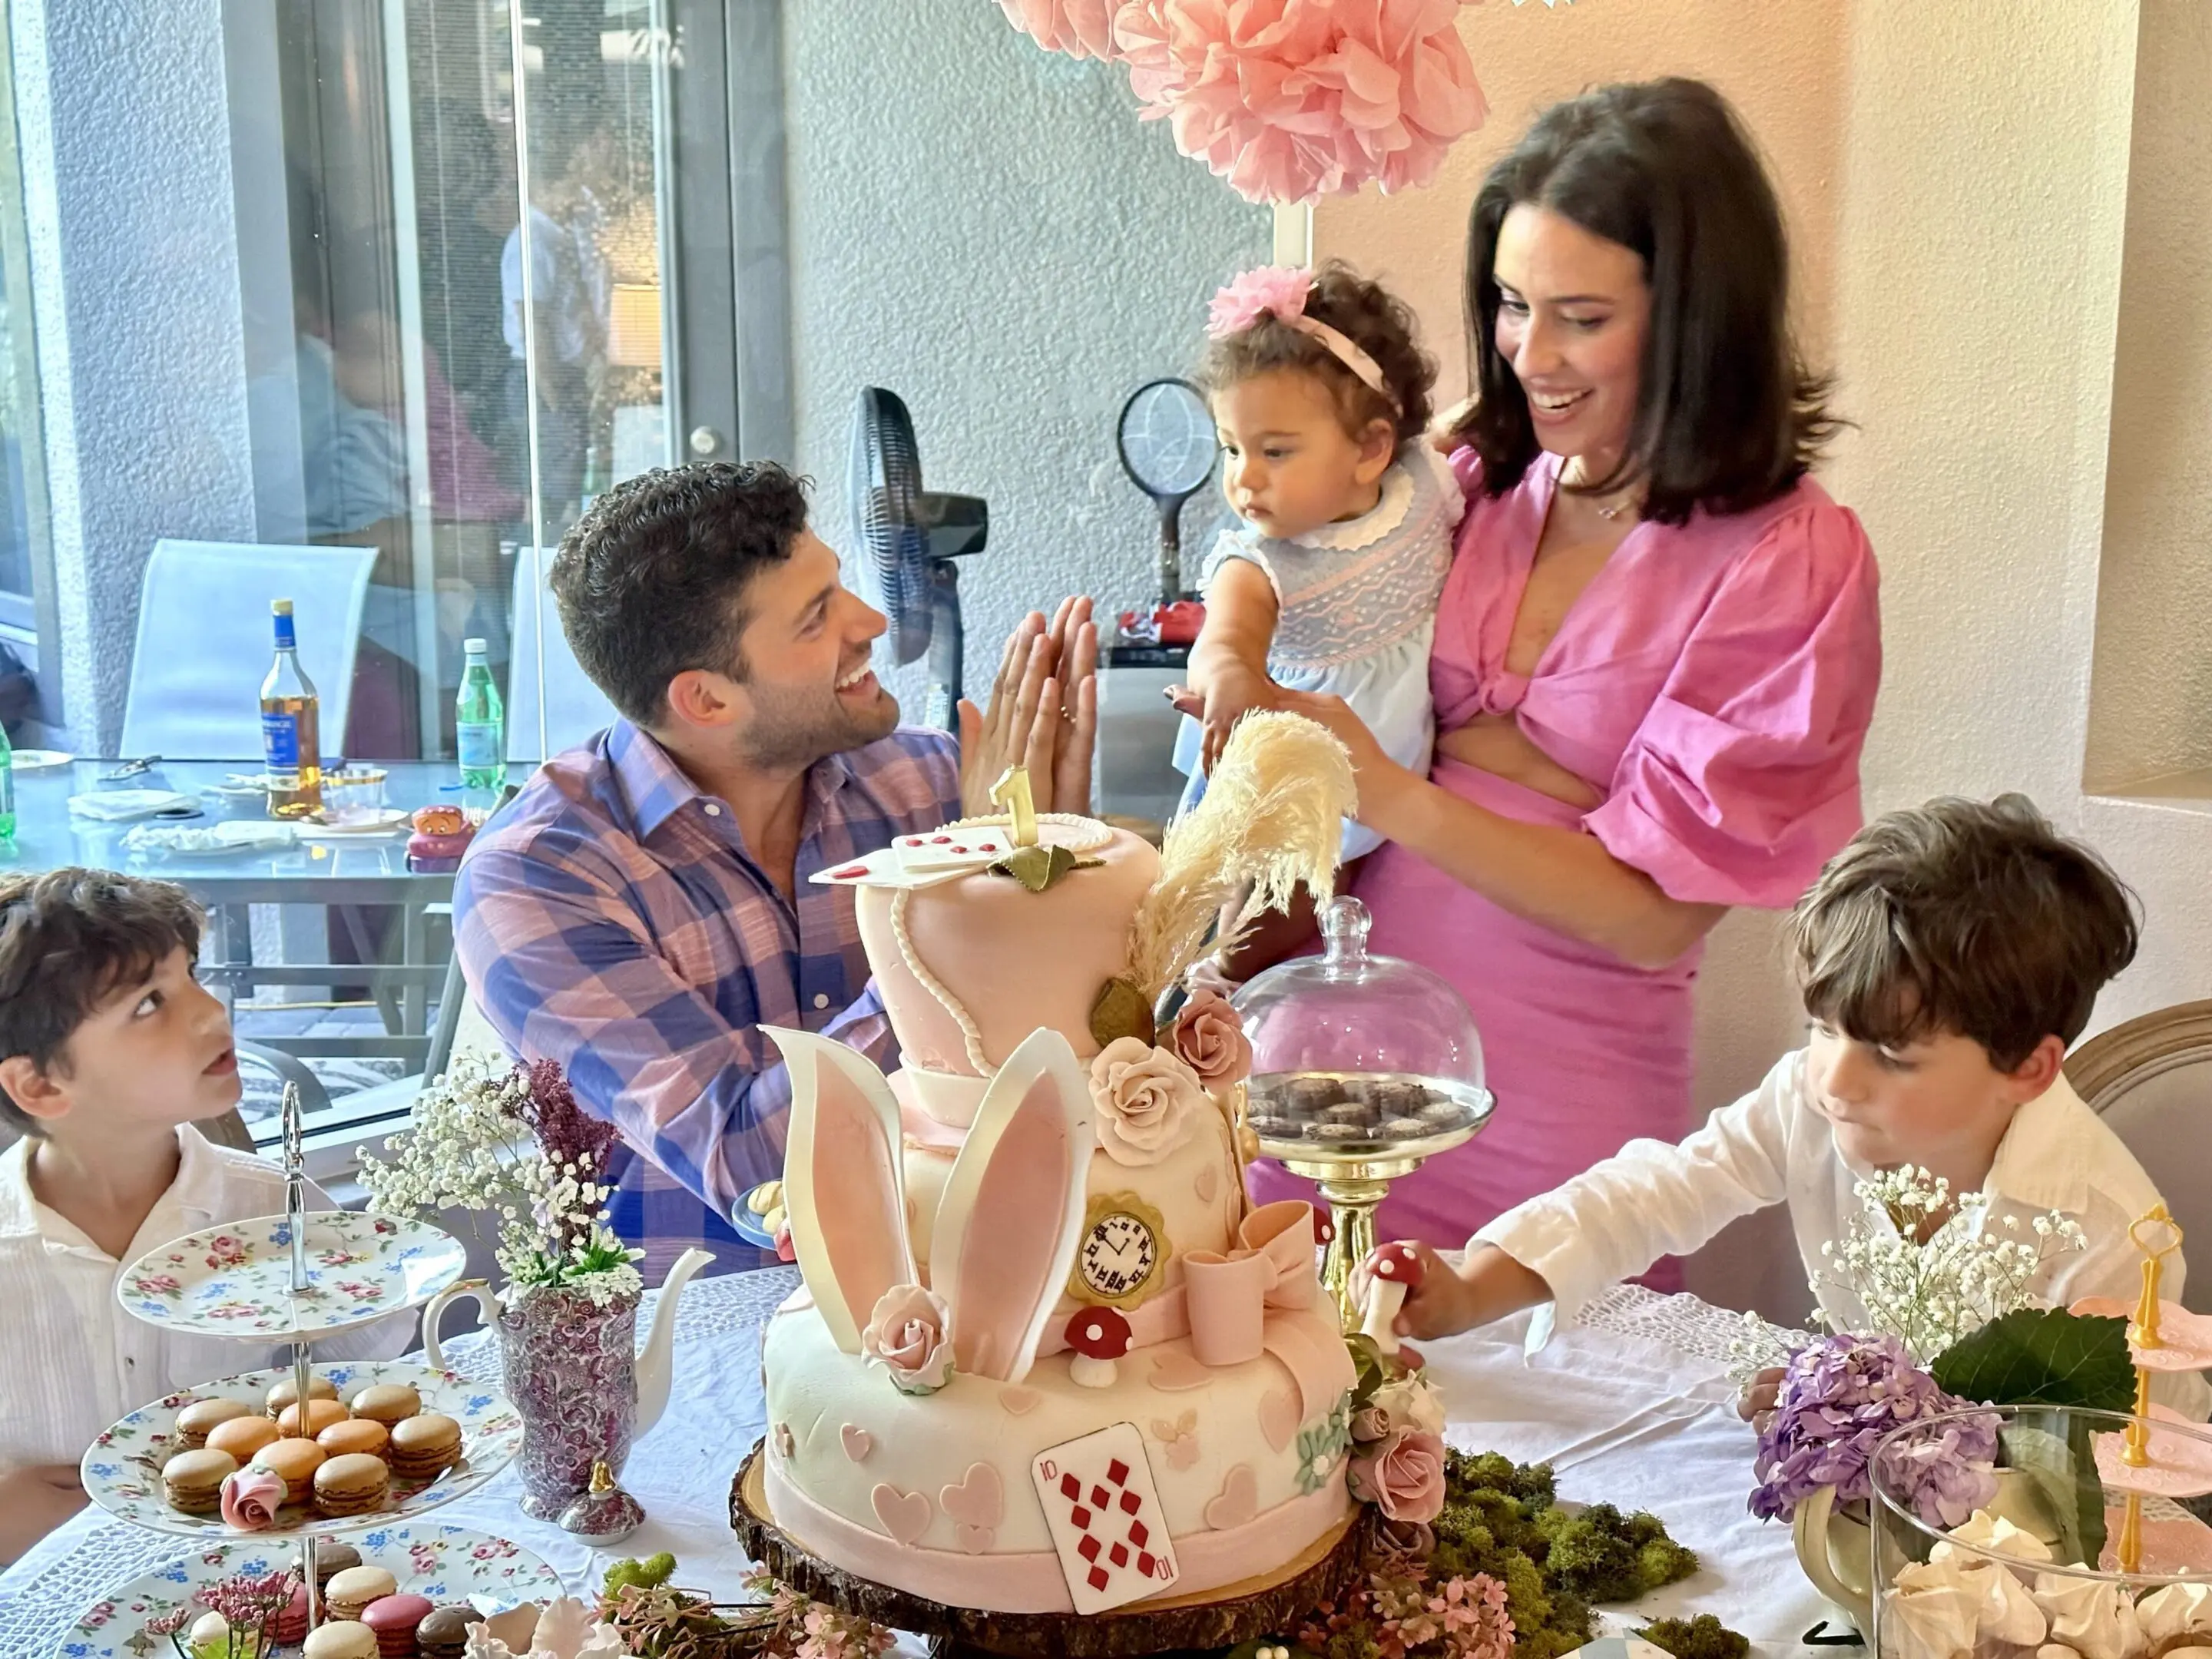 A family sitting at the table with a cake.